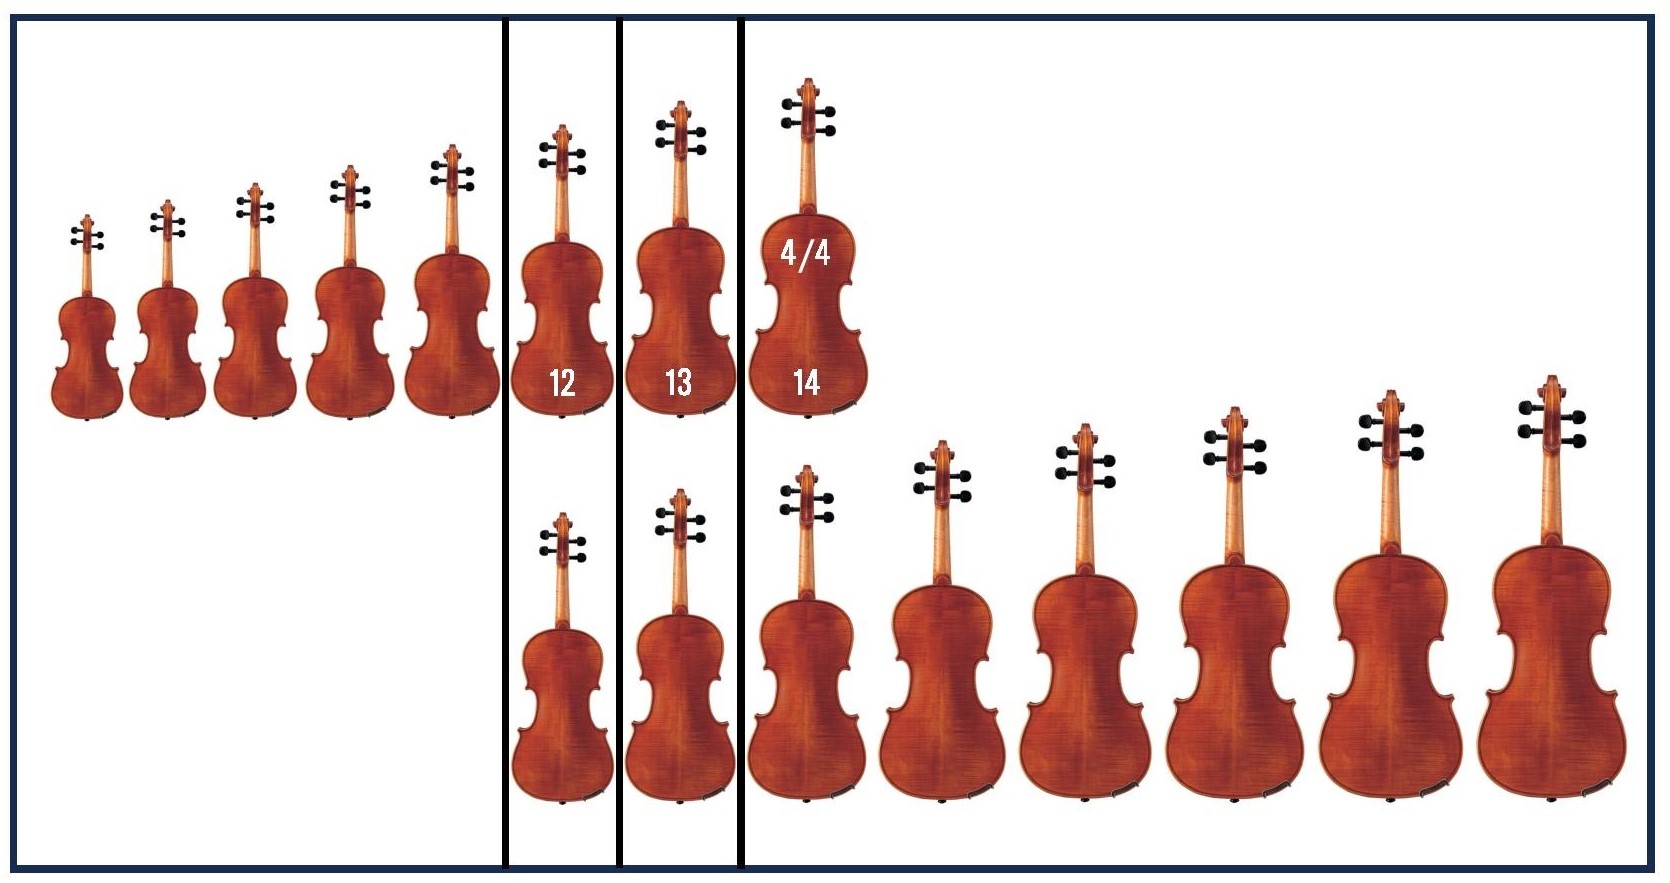 A chart showing the different sizes of violins and violas.